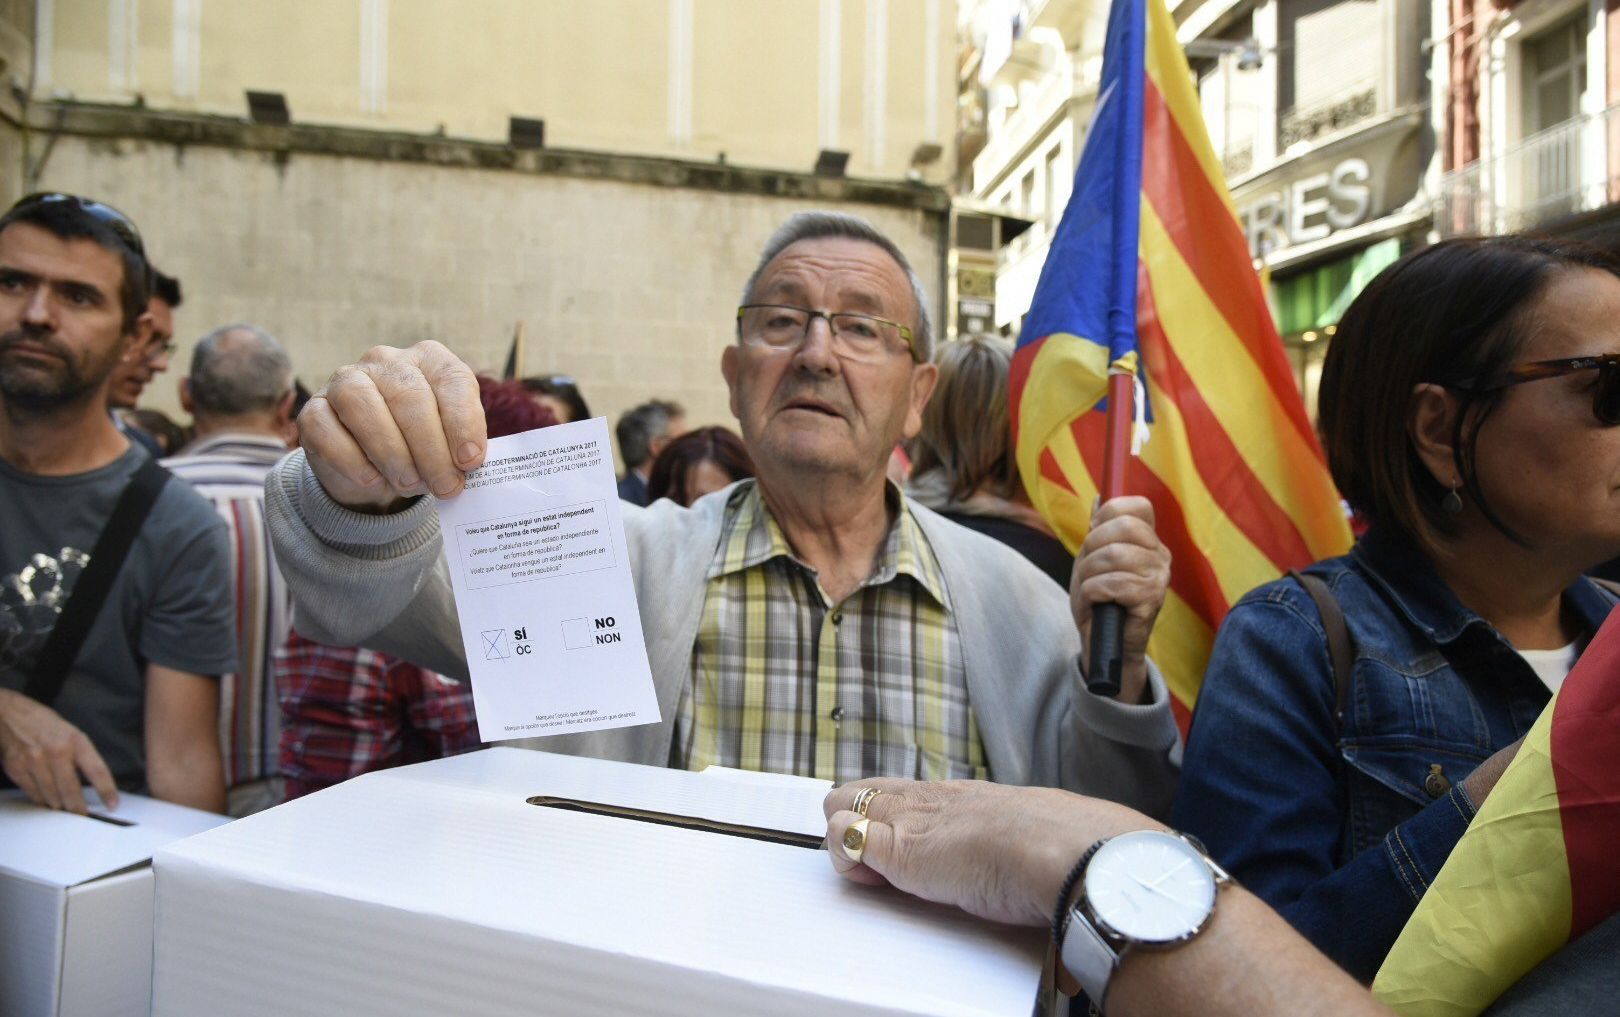 epa06215724 A man casts a mock ballot as hundreds of people gather to protest against the police searches at plaza Paeria, in Lleida, Catalonia, northeastern Spain, 20 September 2017. Spanish Civil Guard carried out different searches for documents related to the '1-O Referendum' resulting in the arrest of 14 people, including some Catalan Government's top officials, according to sources of the investigation. Thousands of Catalans took the streets to protest against the police's action.  EPA/Adria Ropero